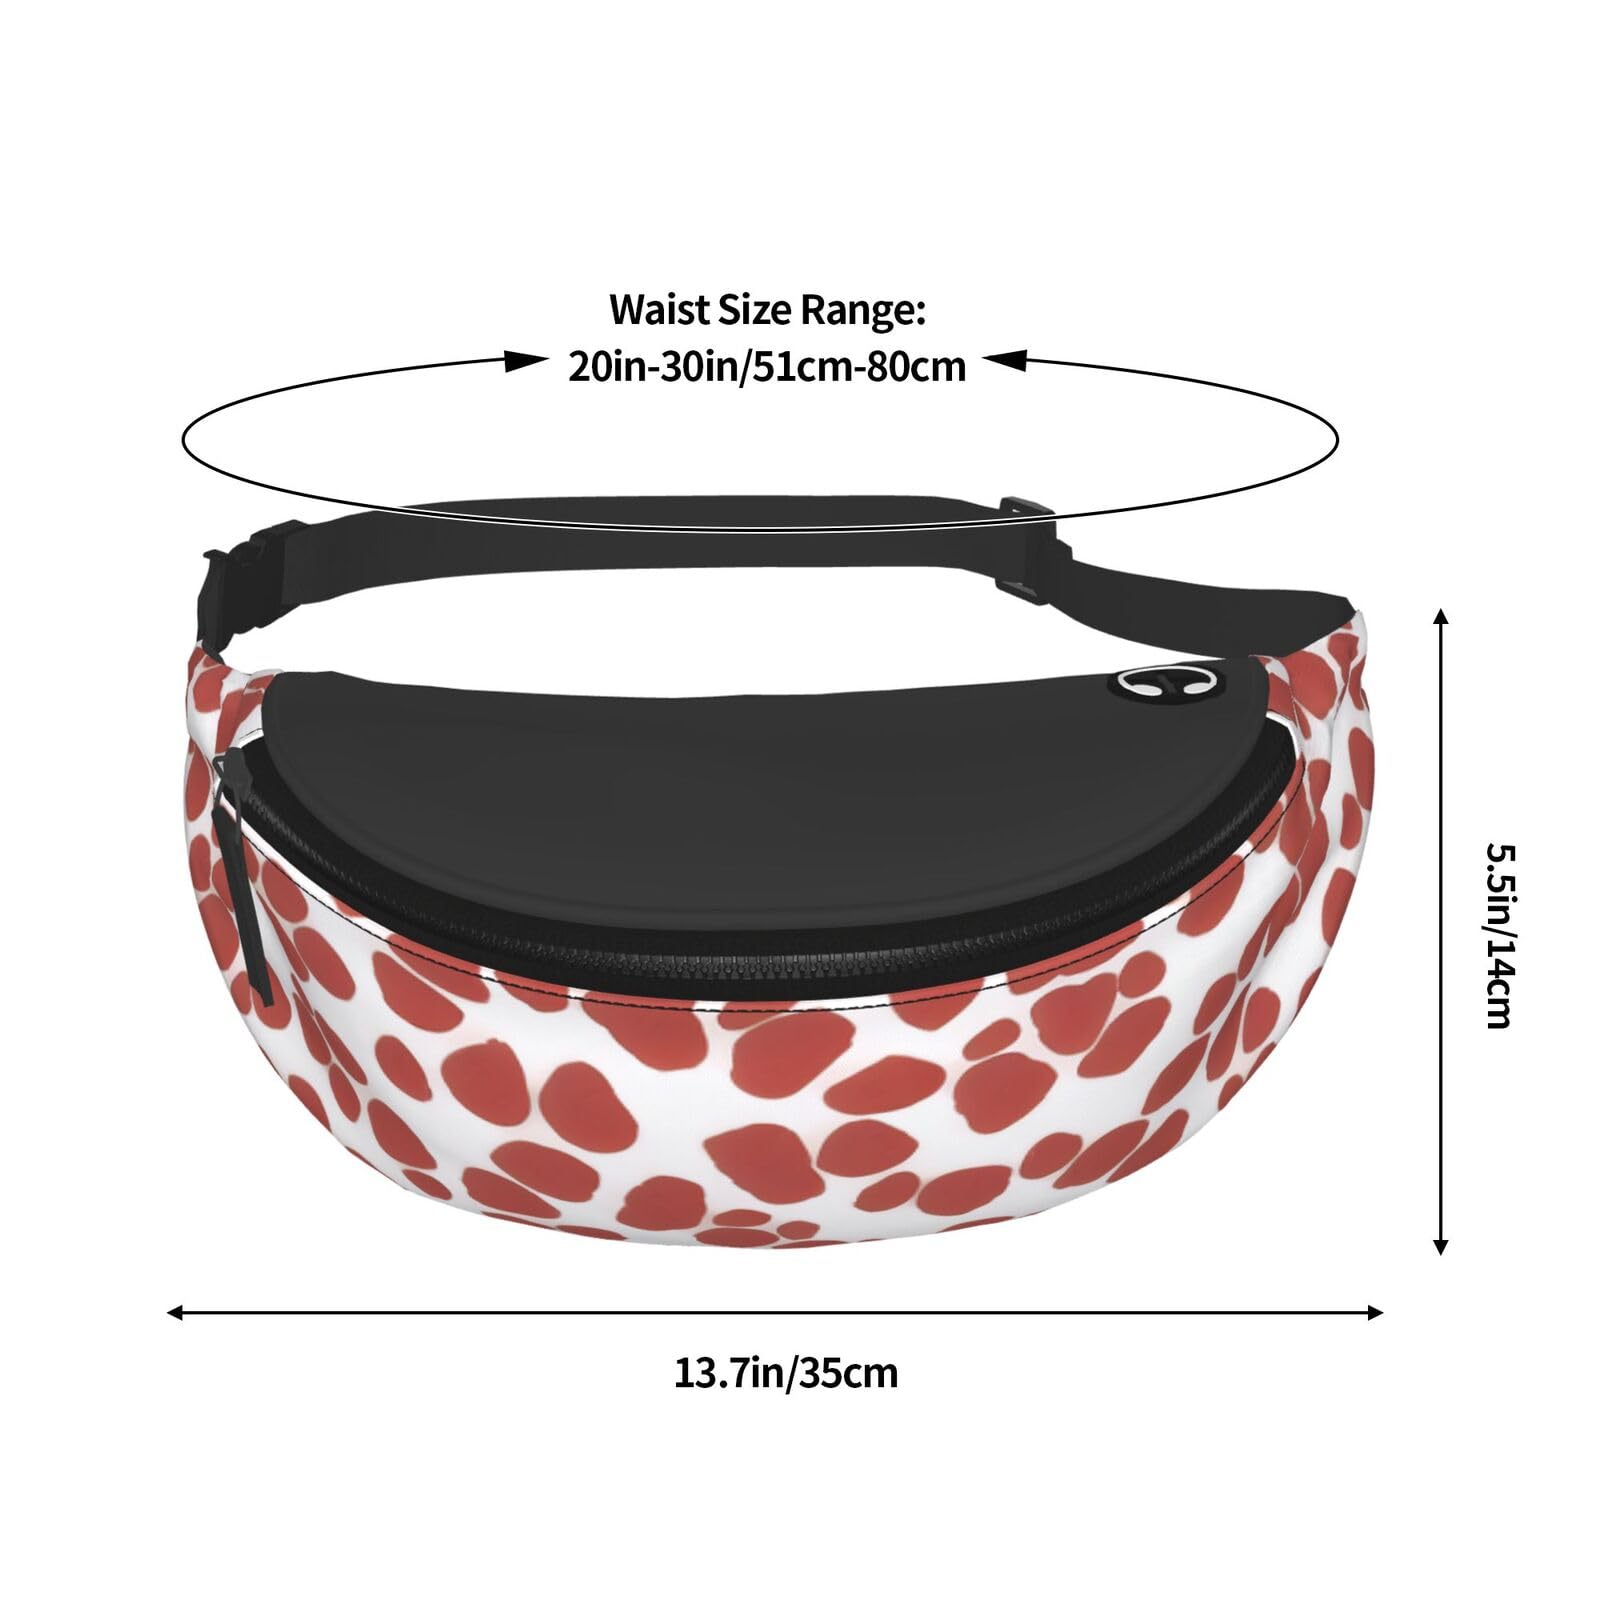 Animal Printed Patterns Fanny Pack For Women And Men Fashion Waist Bag With Adjustable Strap For Hiking Running Cycling